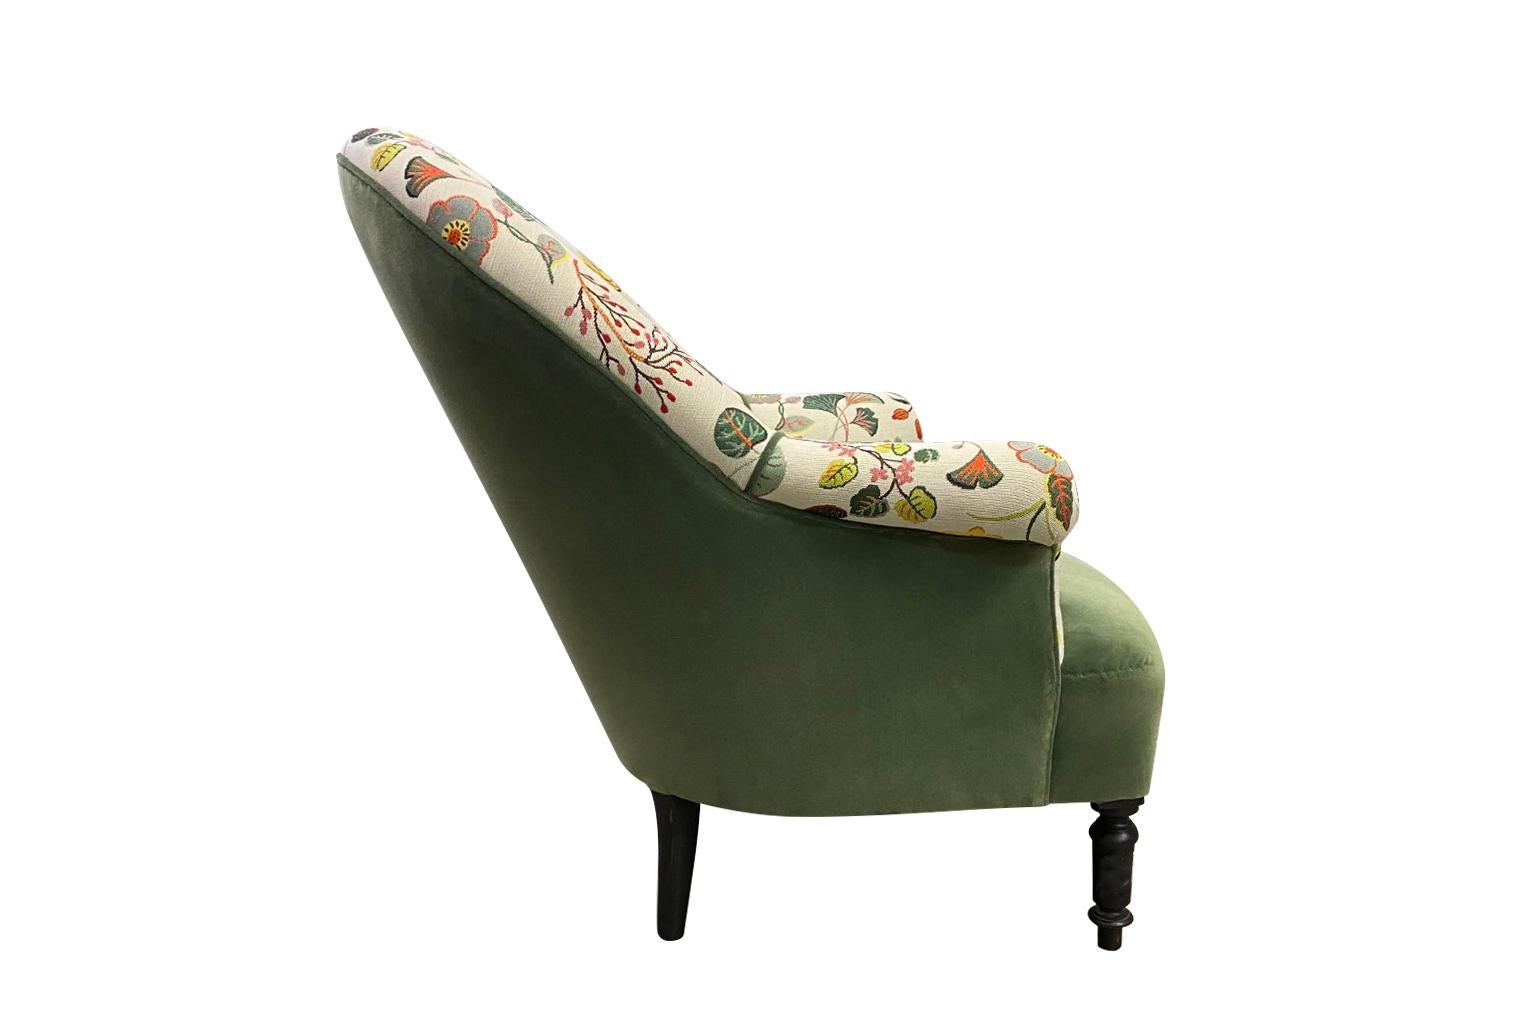 French curved chair with colorful floral fabric, the seat and back are contrasted in a complimentary green velvet. Original leg finish has not been altered which adds to the character and charm of the piece.